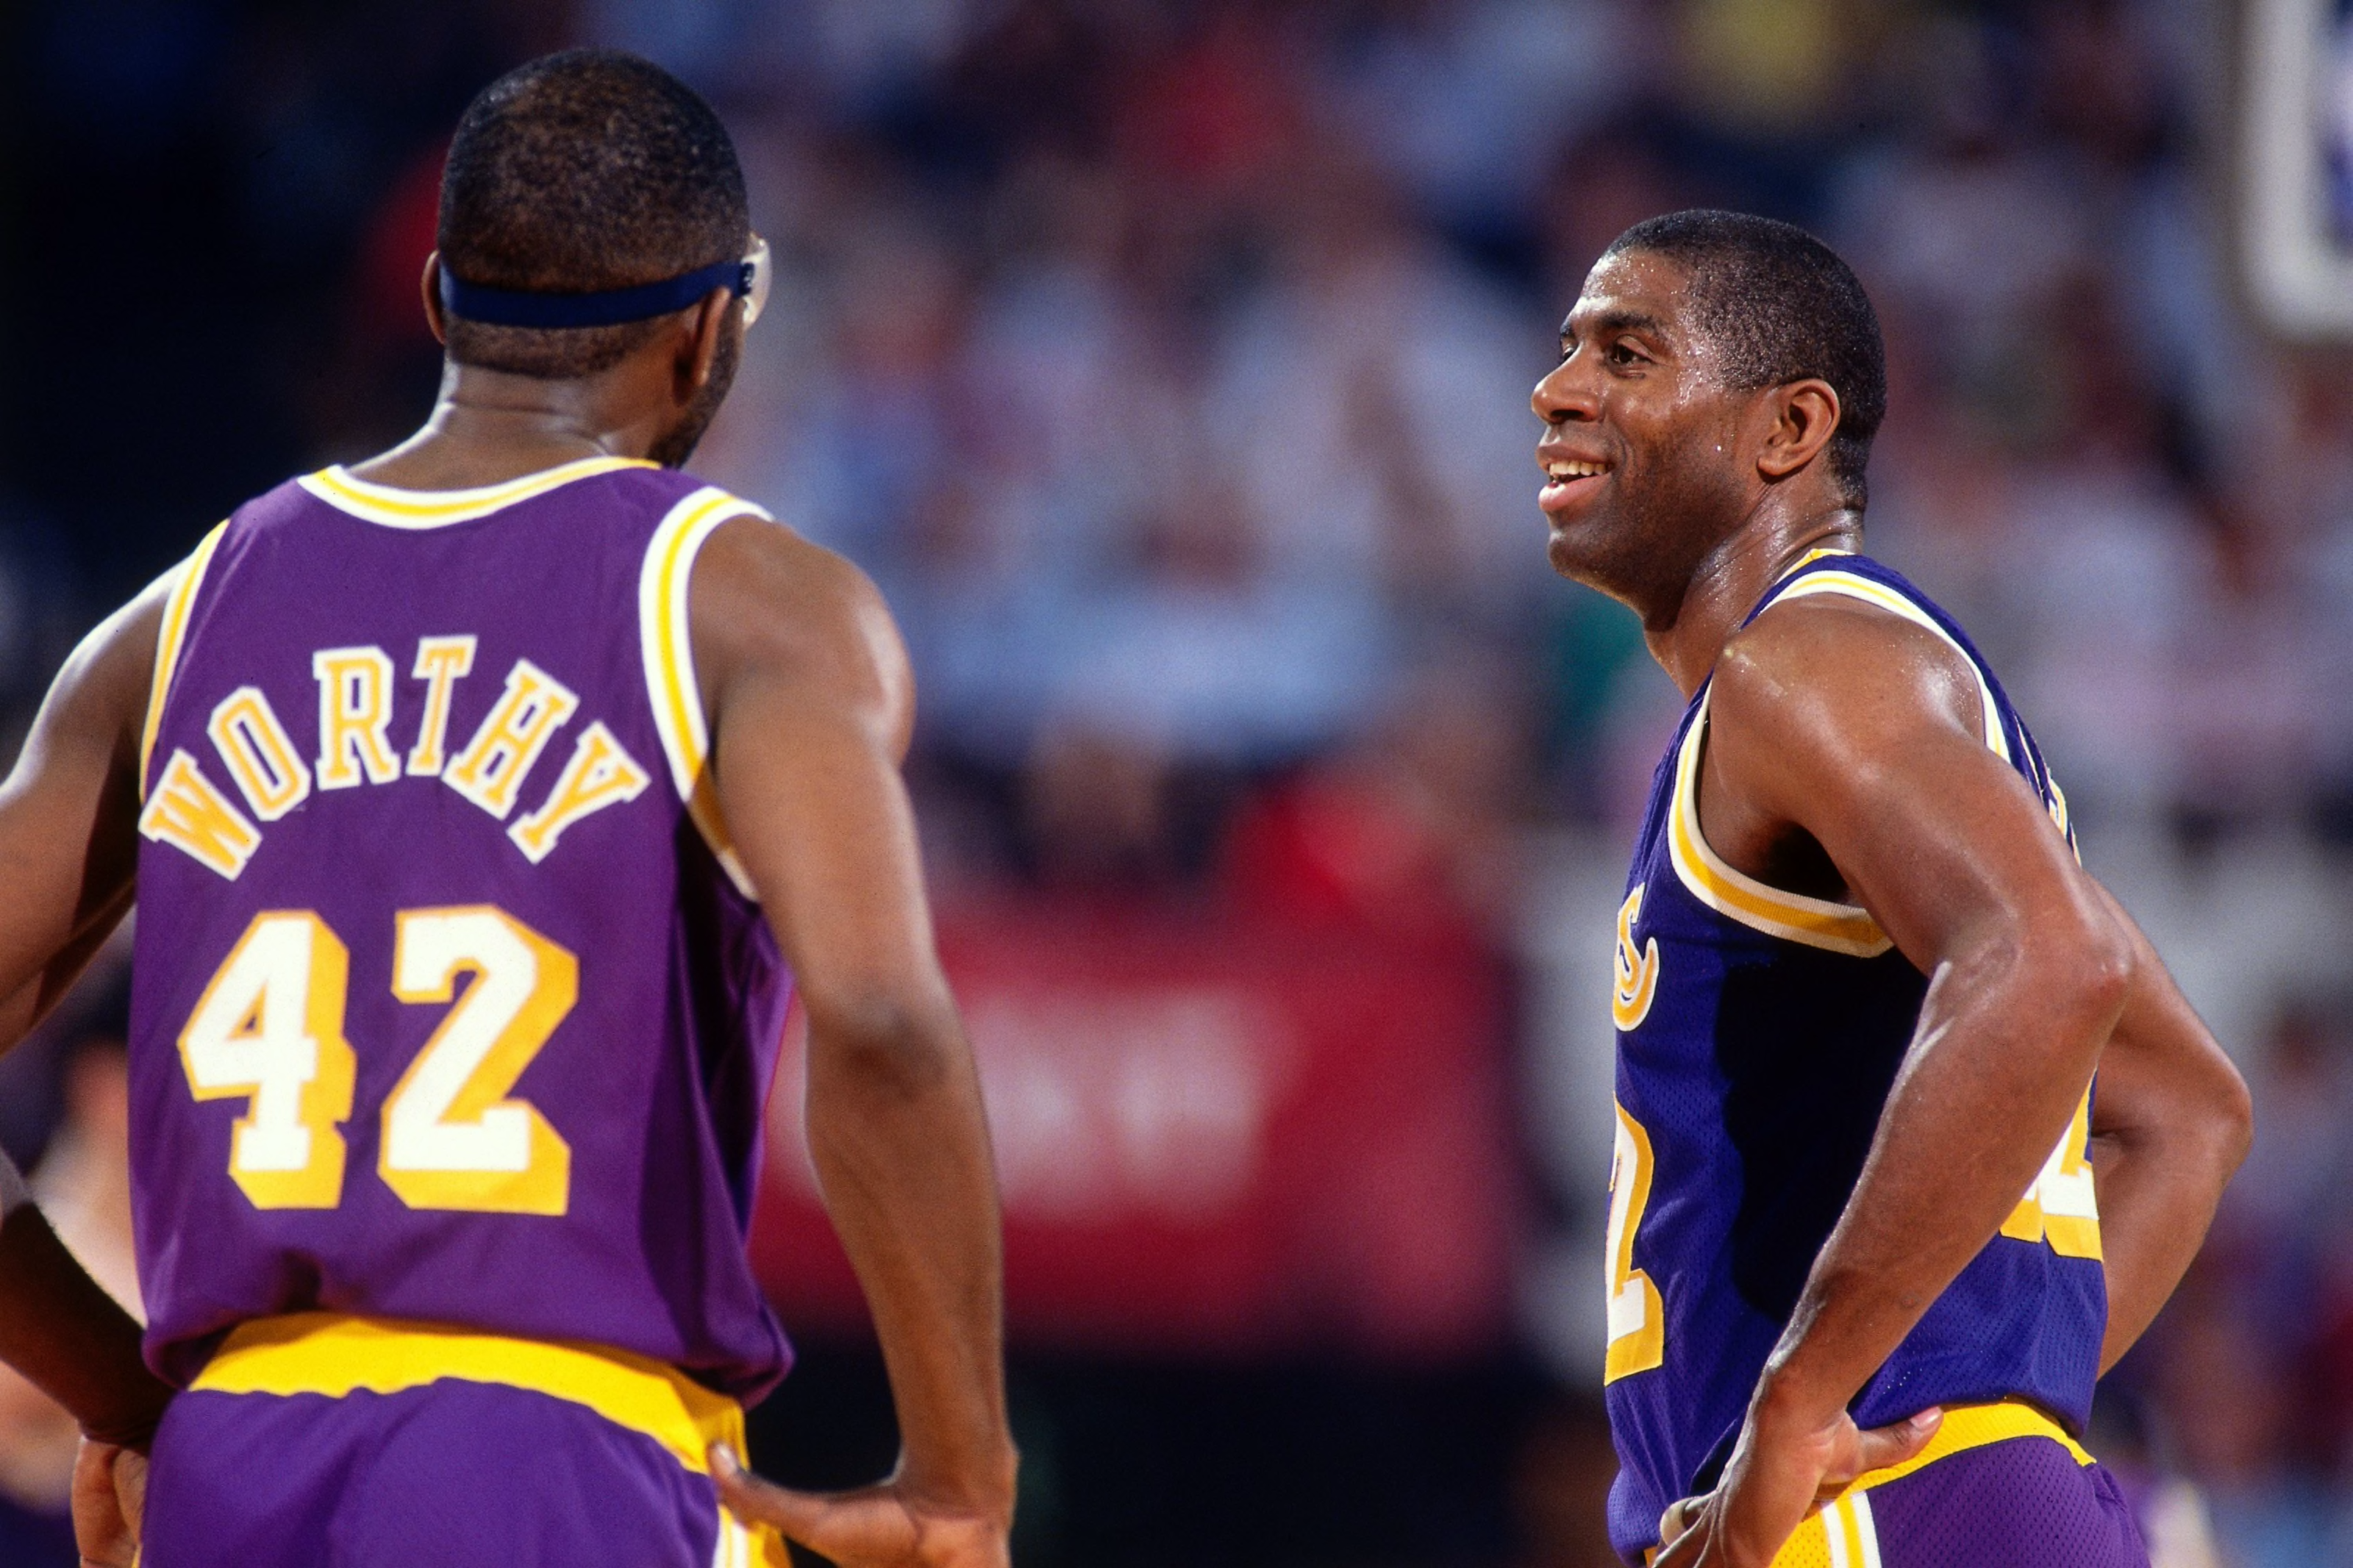 The battle of the two greatest duos in Lakers' franchise history